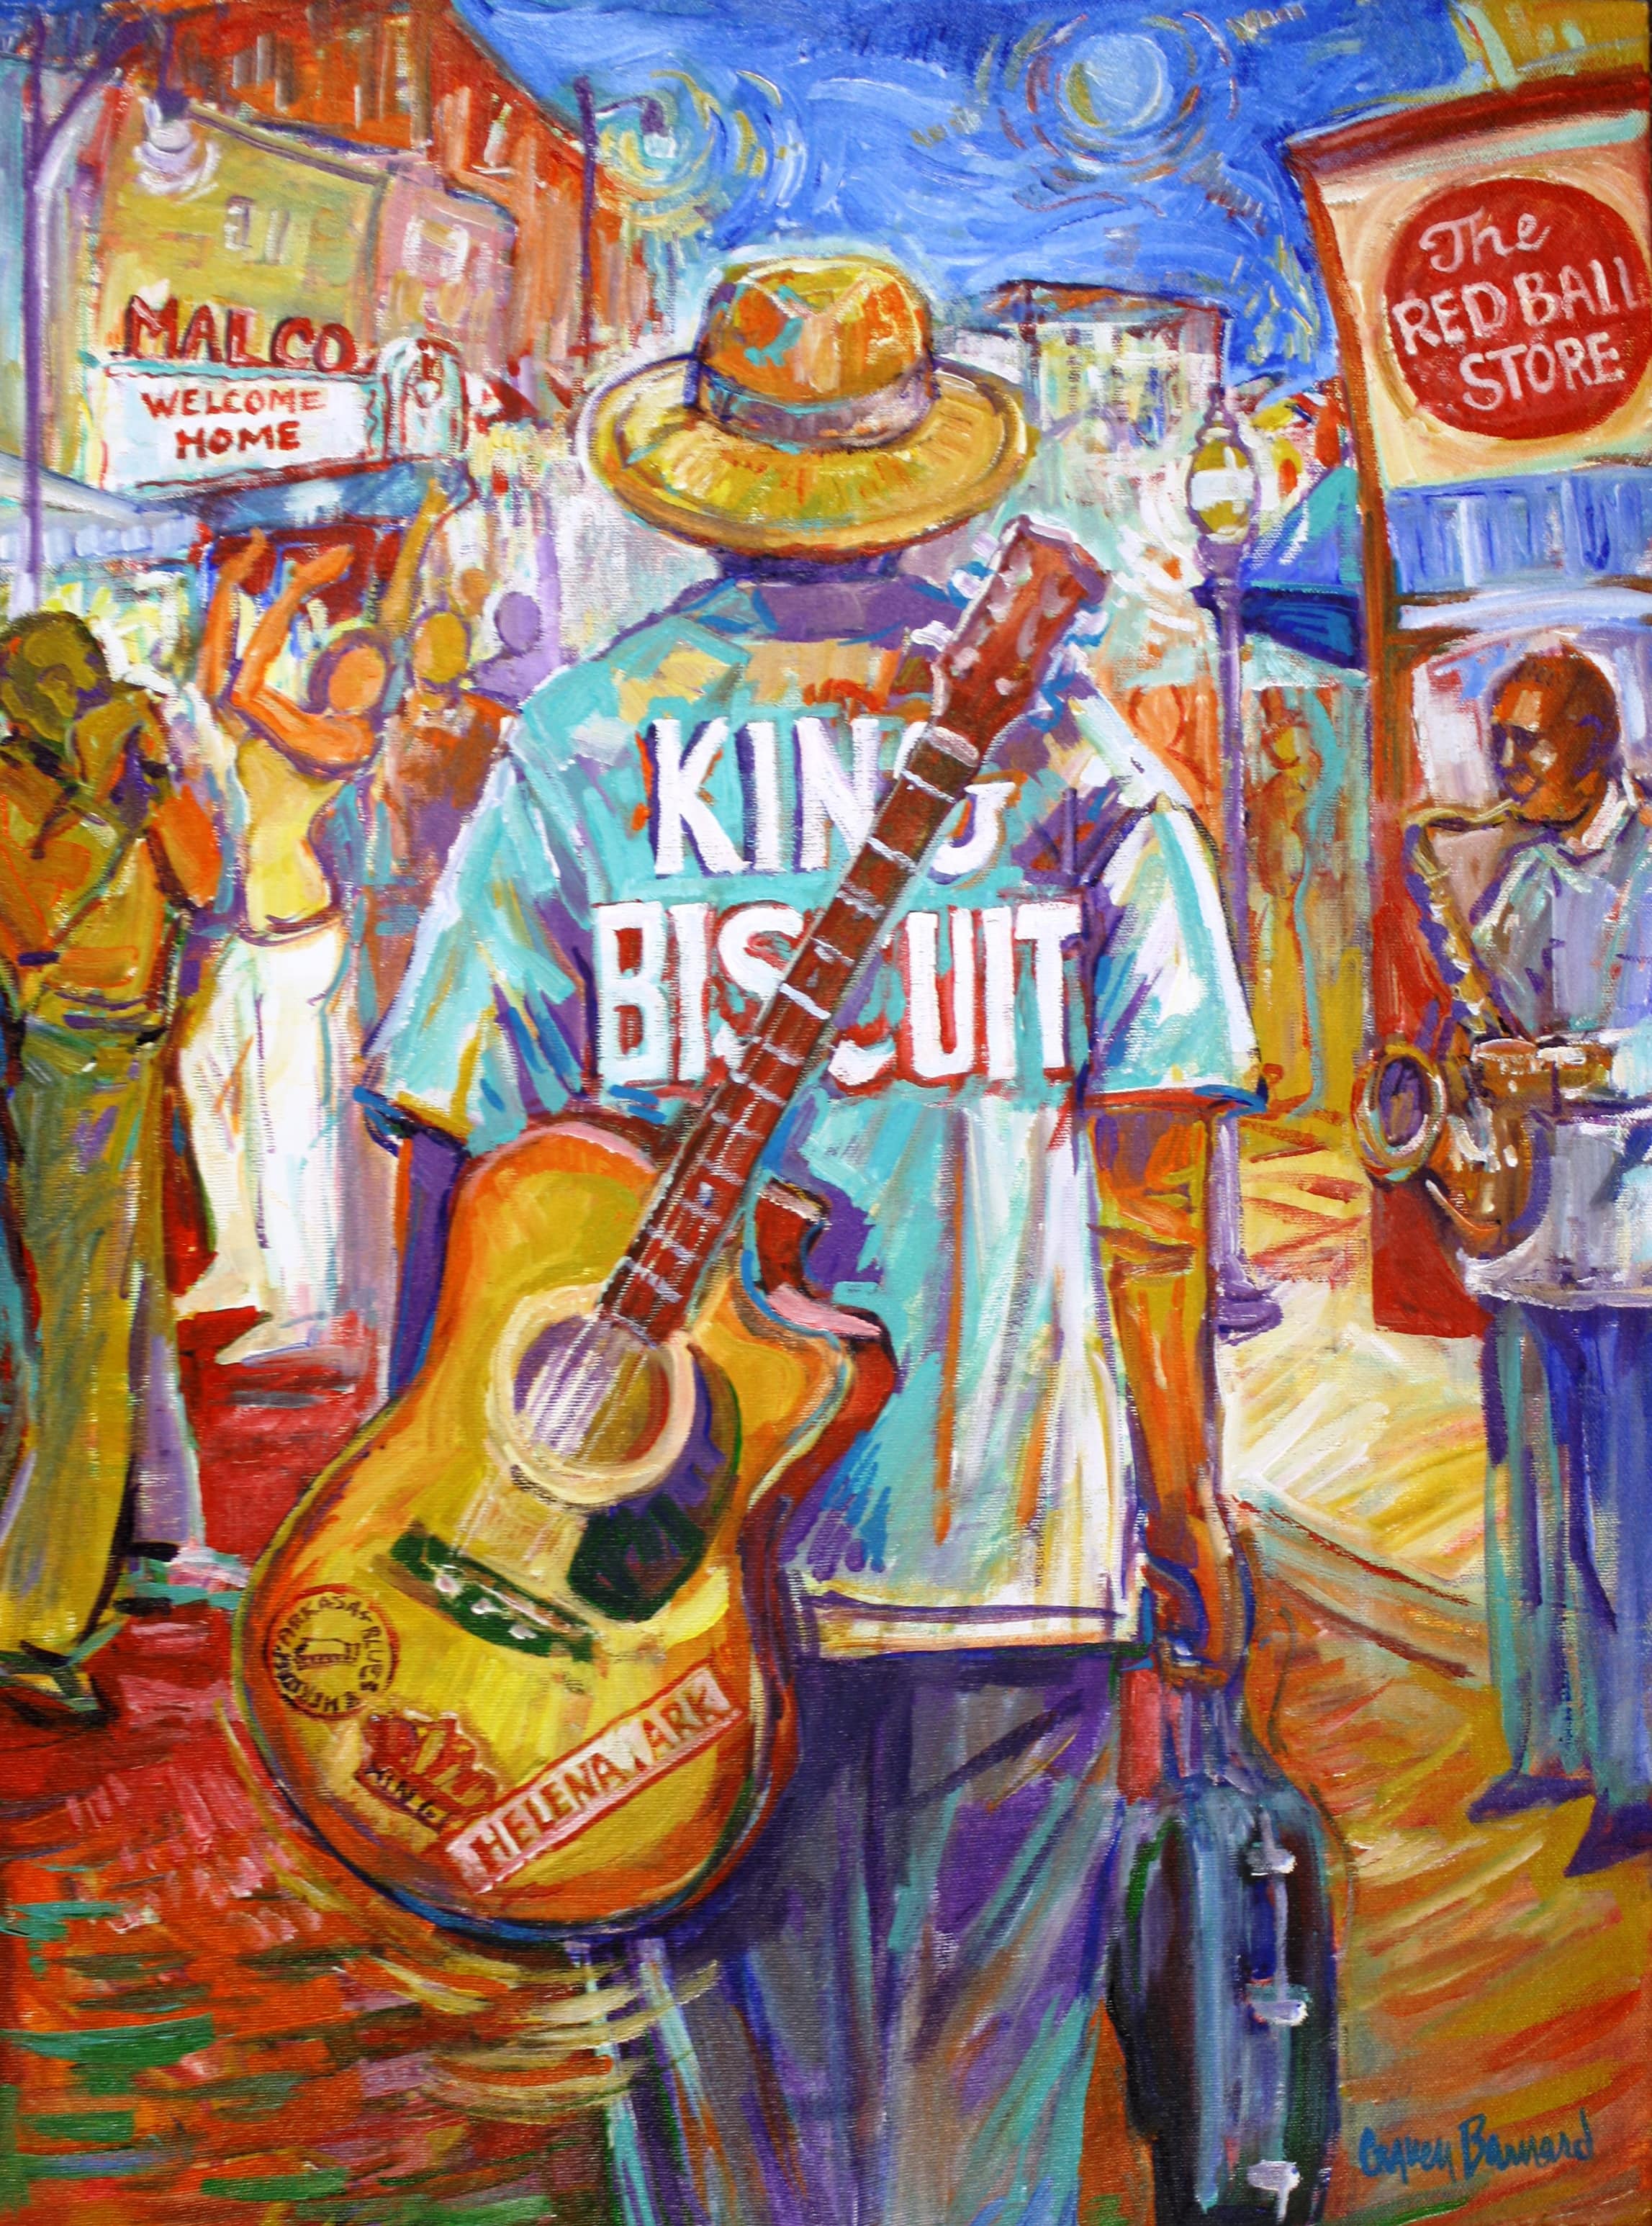 king biscuit shirt with guitar